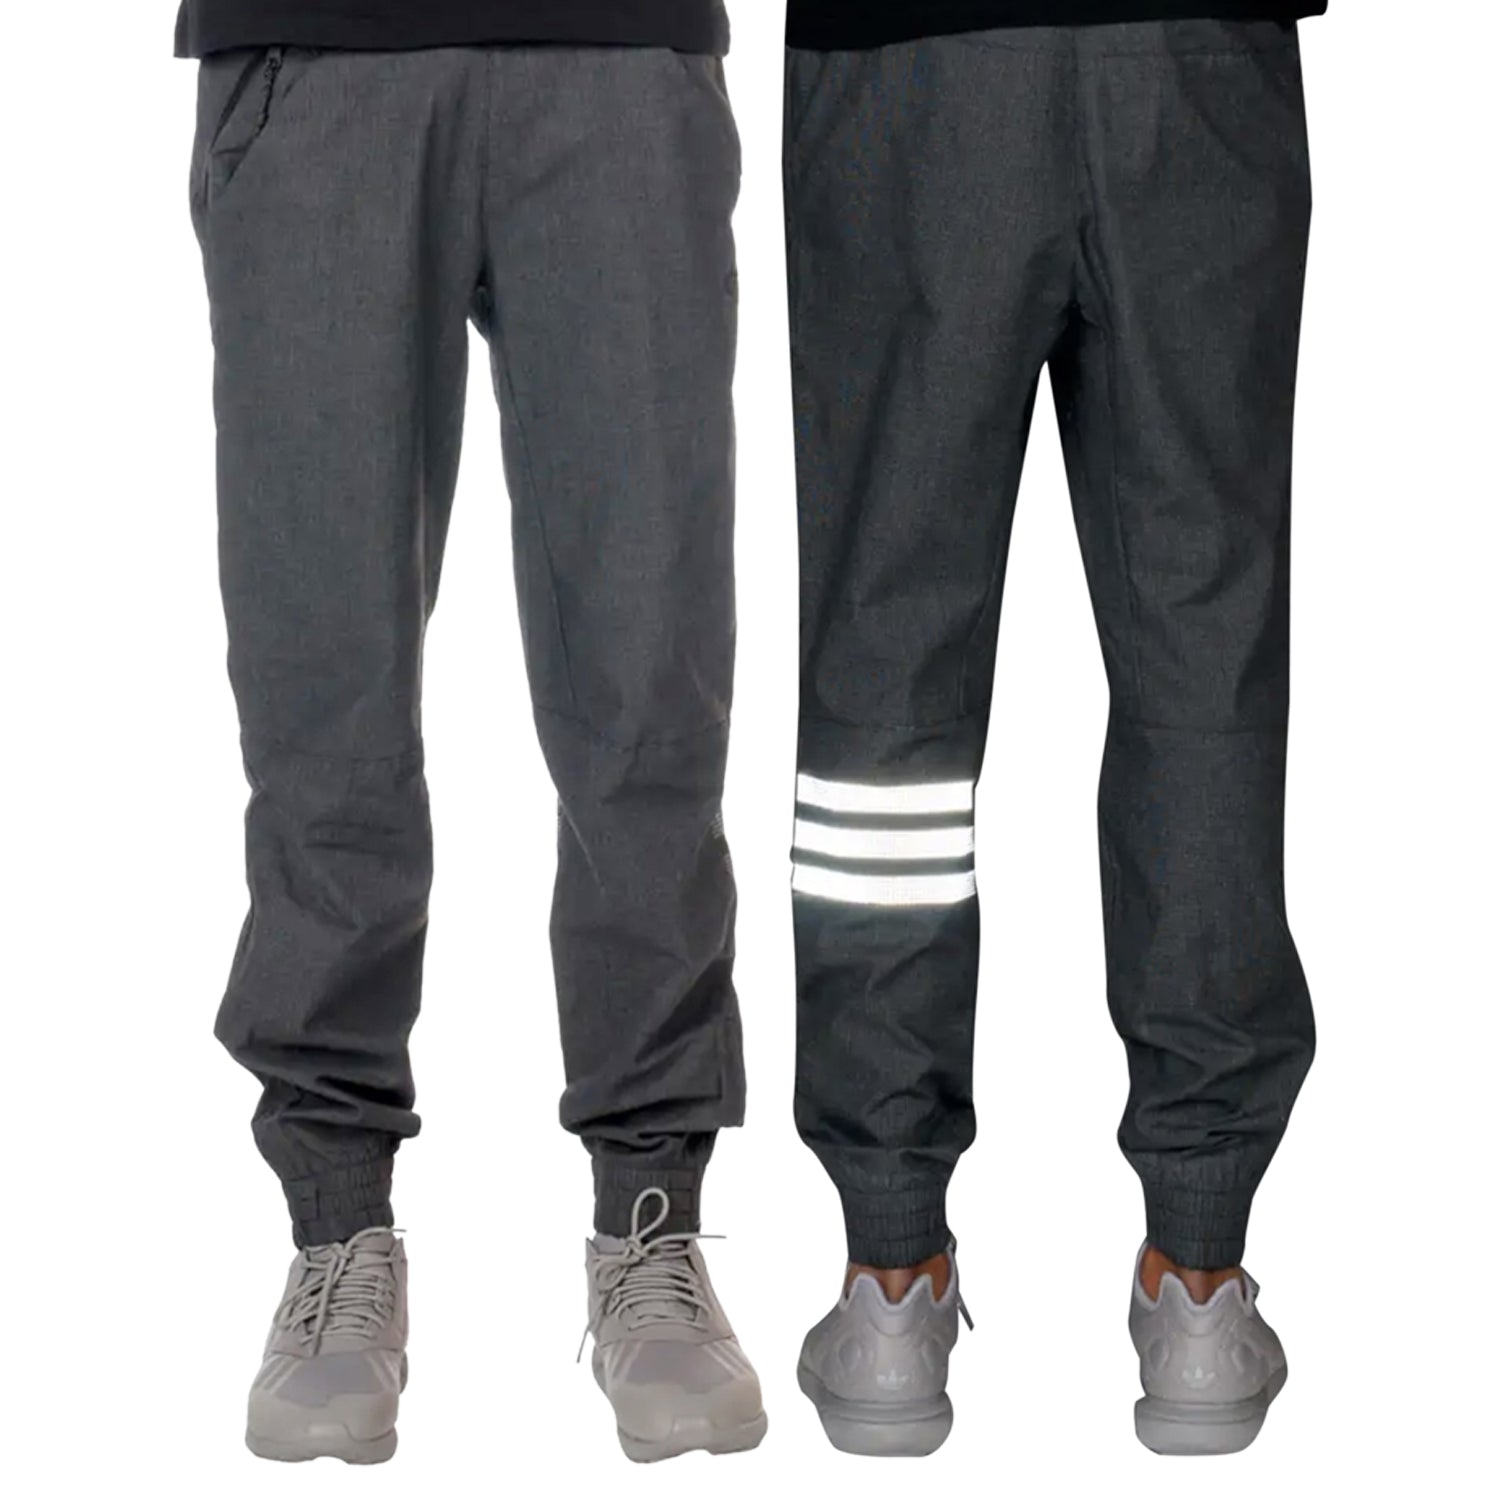 Adidas Sport Luxe Woven Pant Mens Style : Ab9272